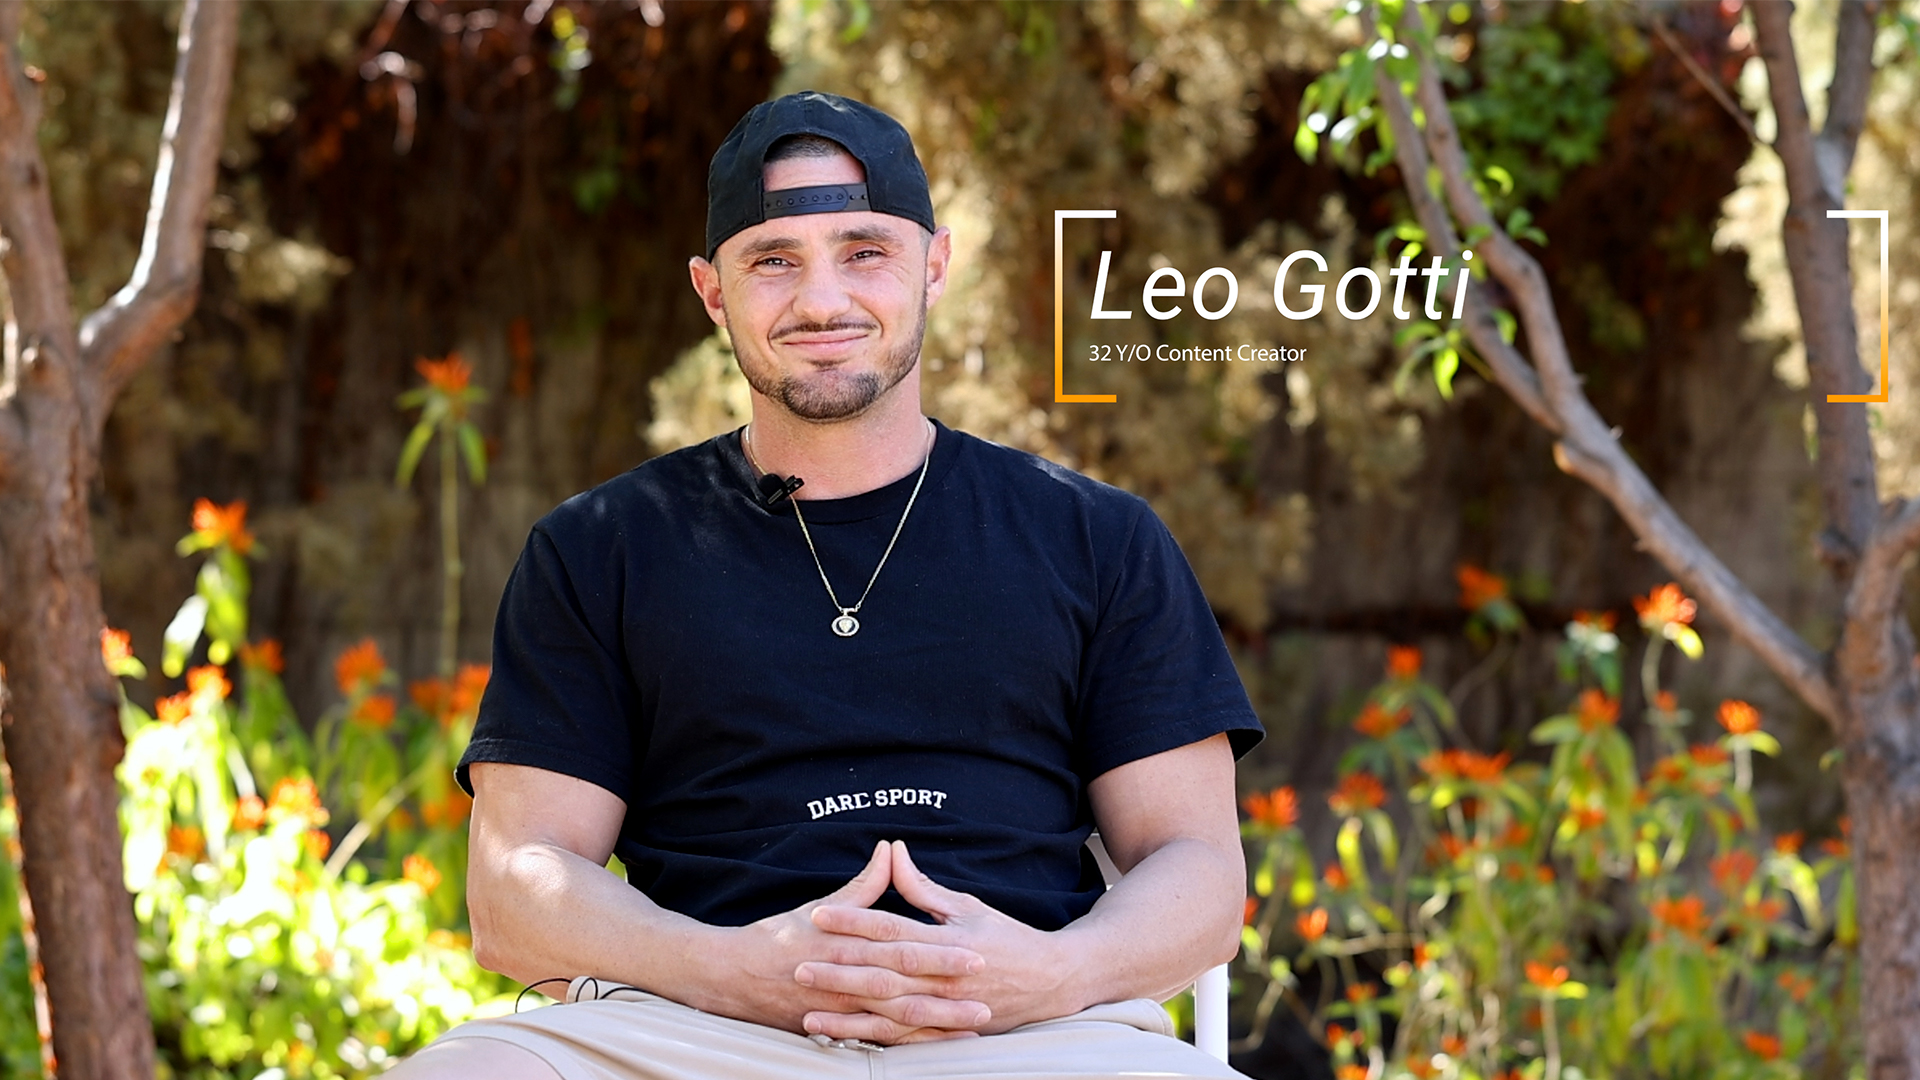 Leo Gotti Gets Ready To Turn Up The Heat And Get Freaky!